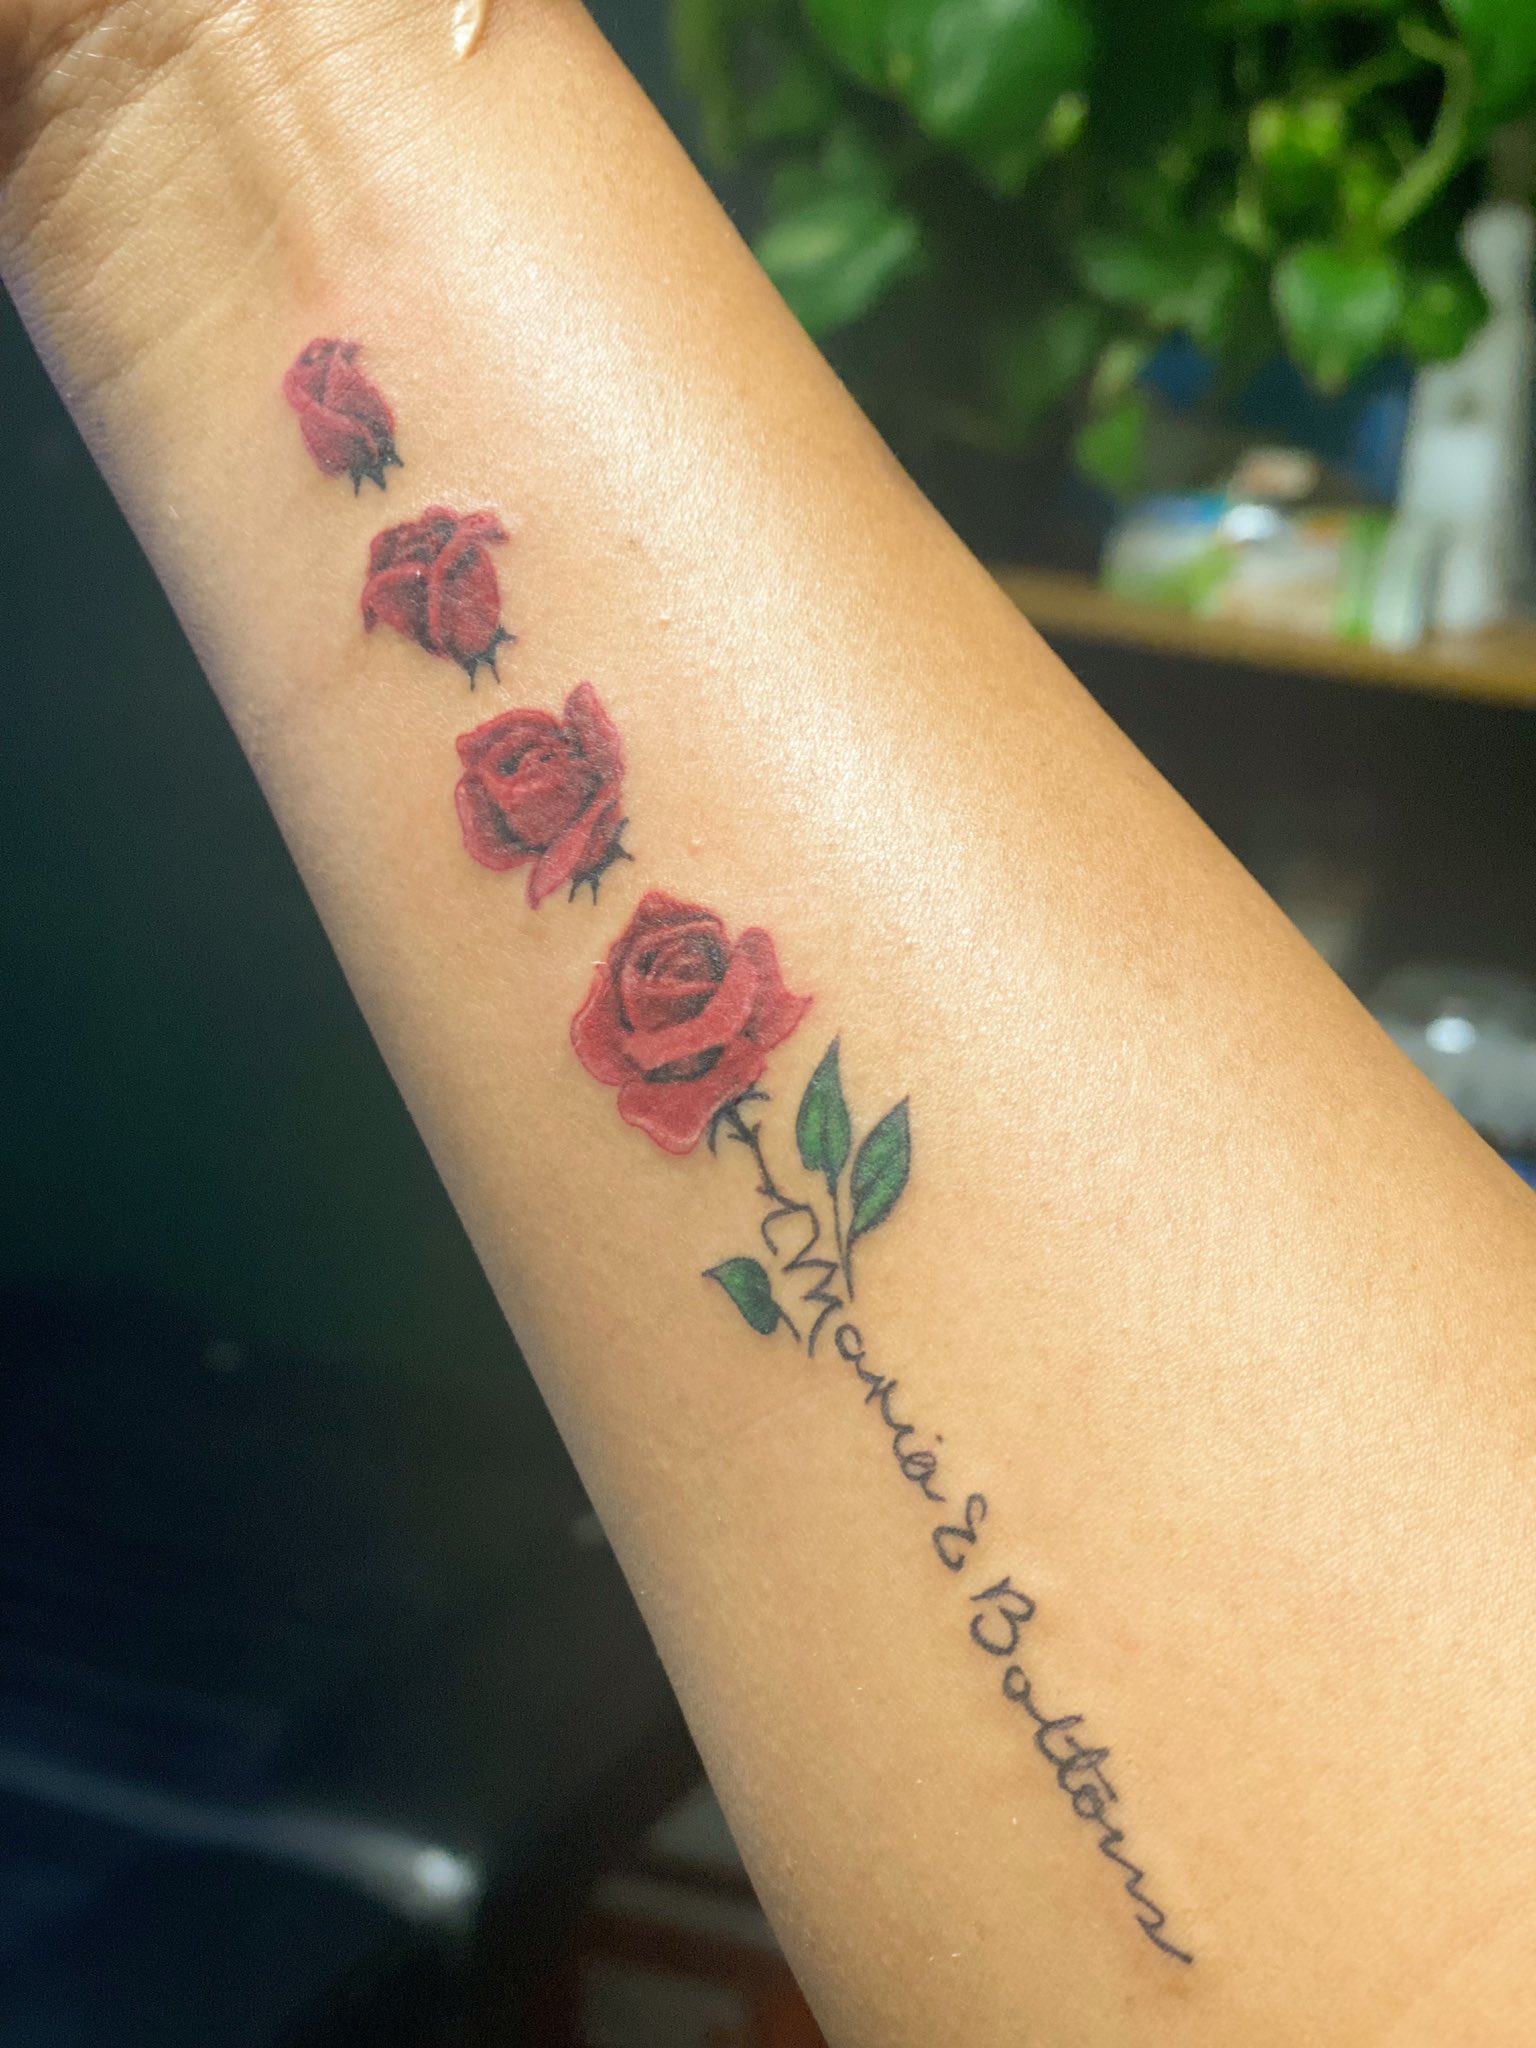 Love temporary tattoo design  Fake removable  High Quality temp tatoo  Designs last 510 days  decals go on with water  Amazonca Handmade  Products